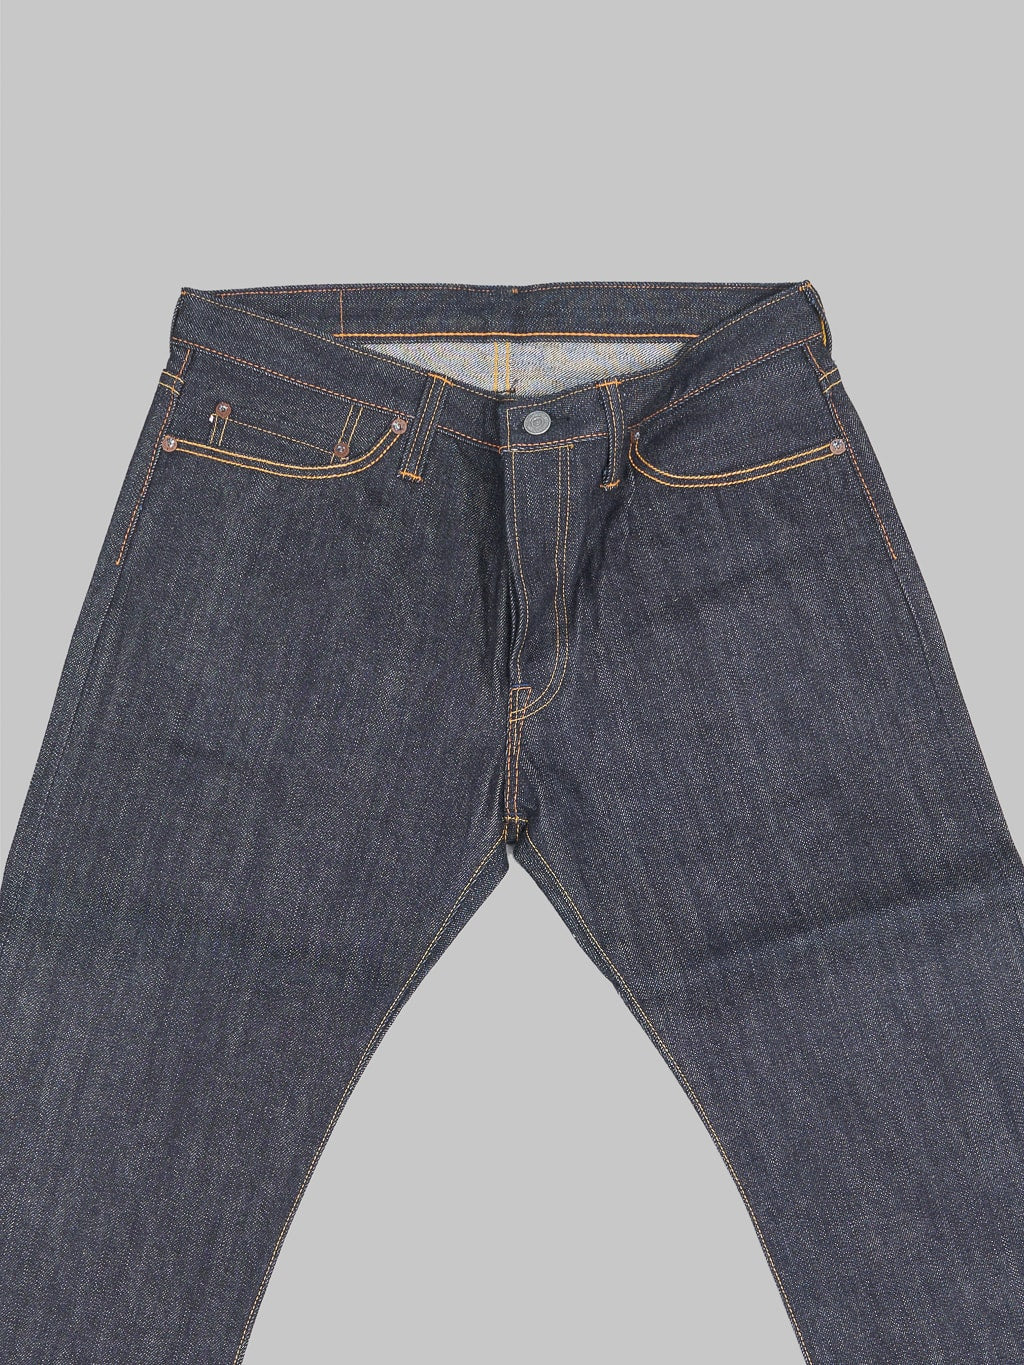 The Flat Head D306 Tight Tapered Jeans  waist